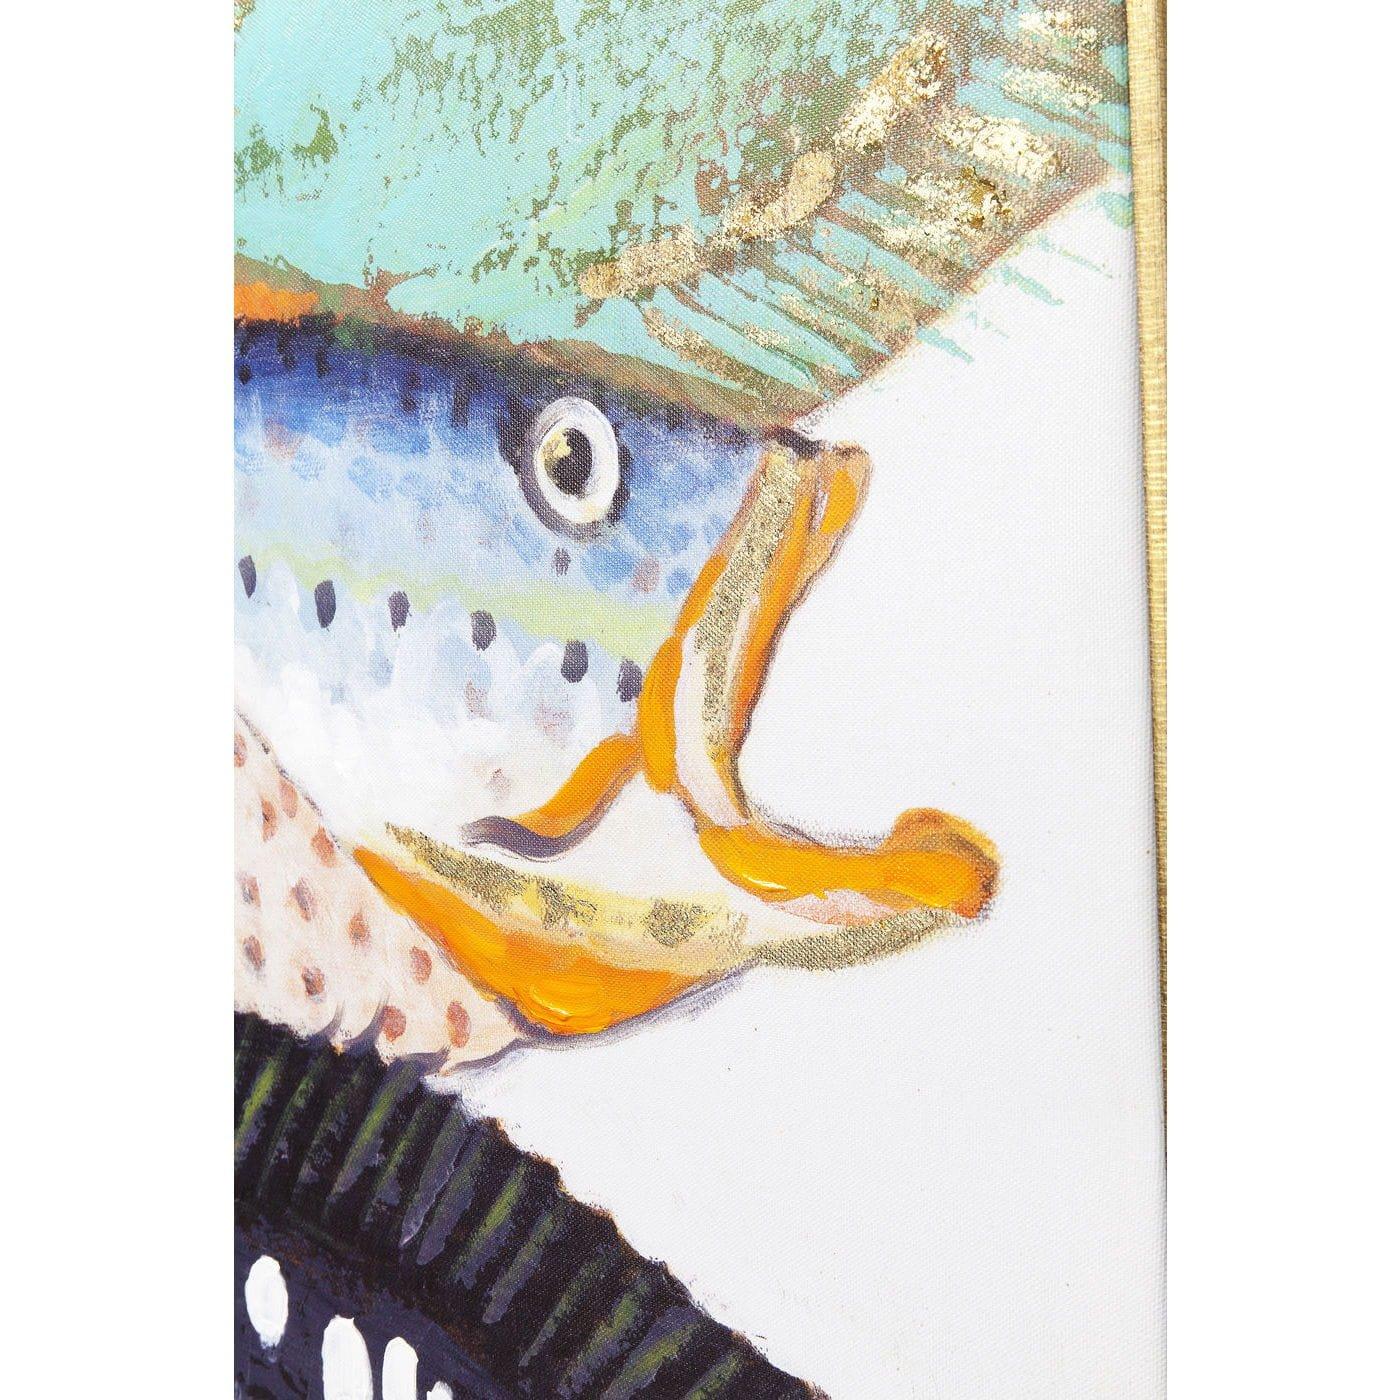 KARE Design Tableau Touched Fish Meeting Two 100x70cm  